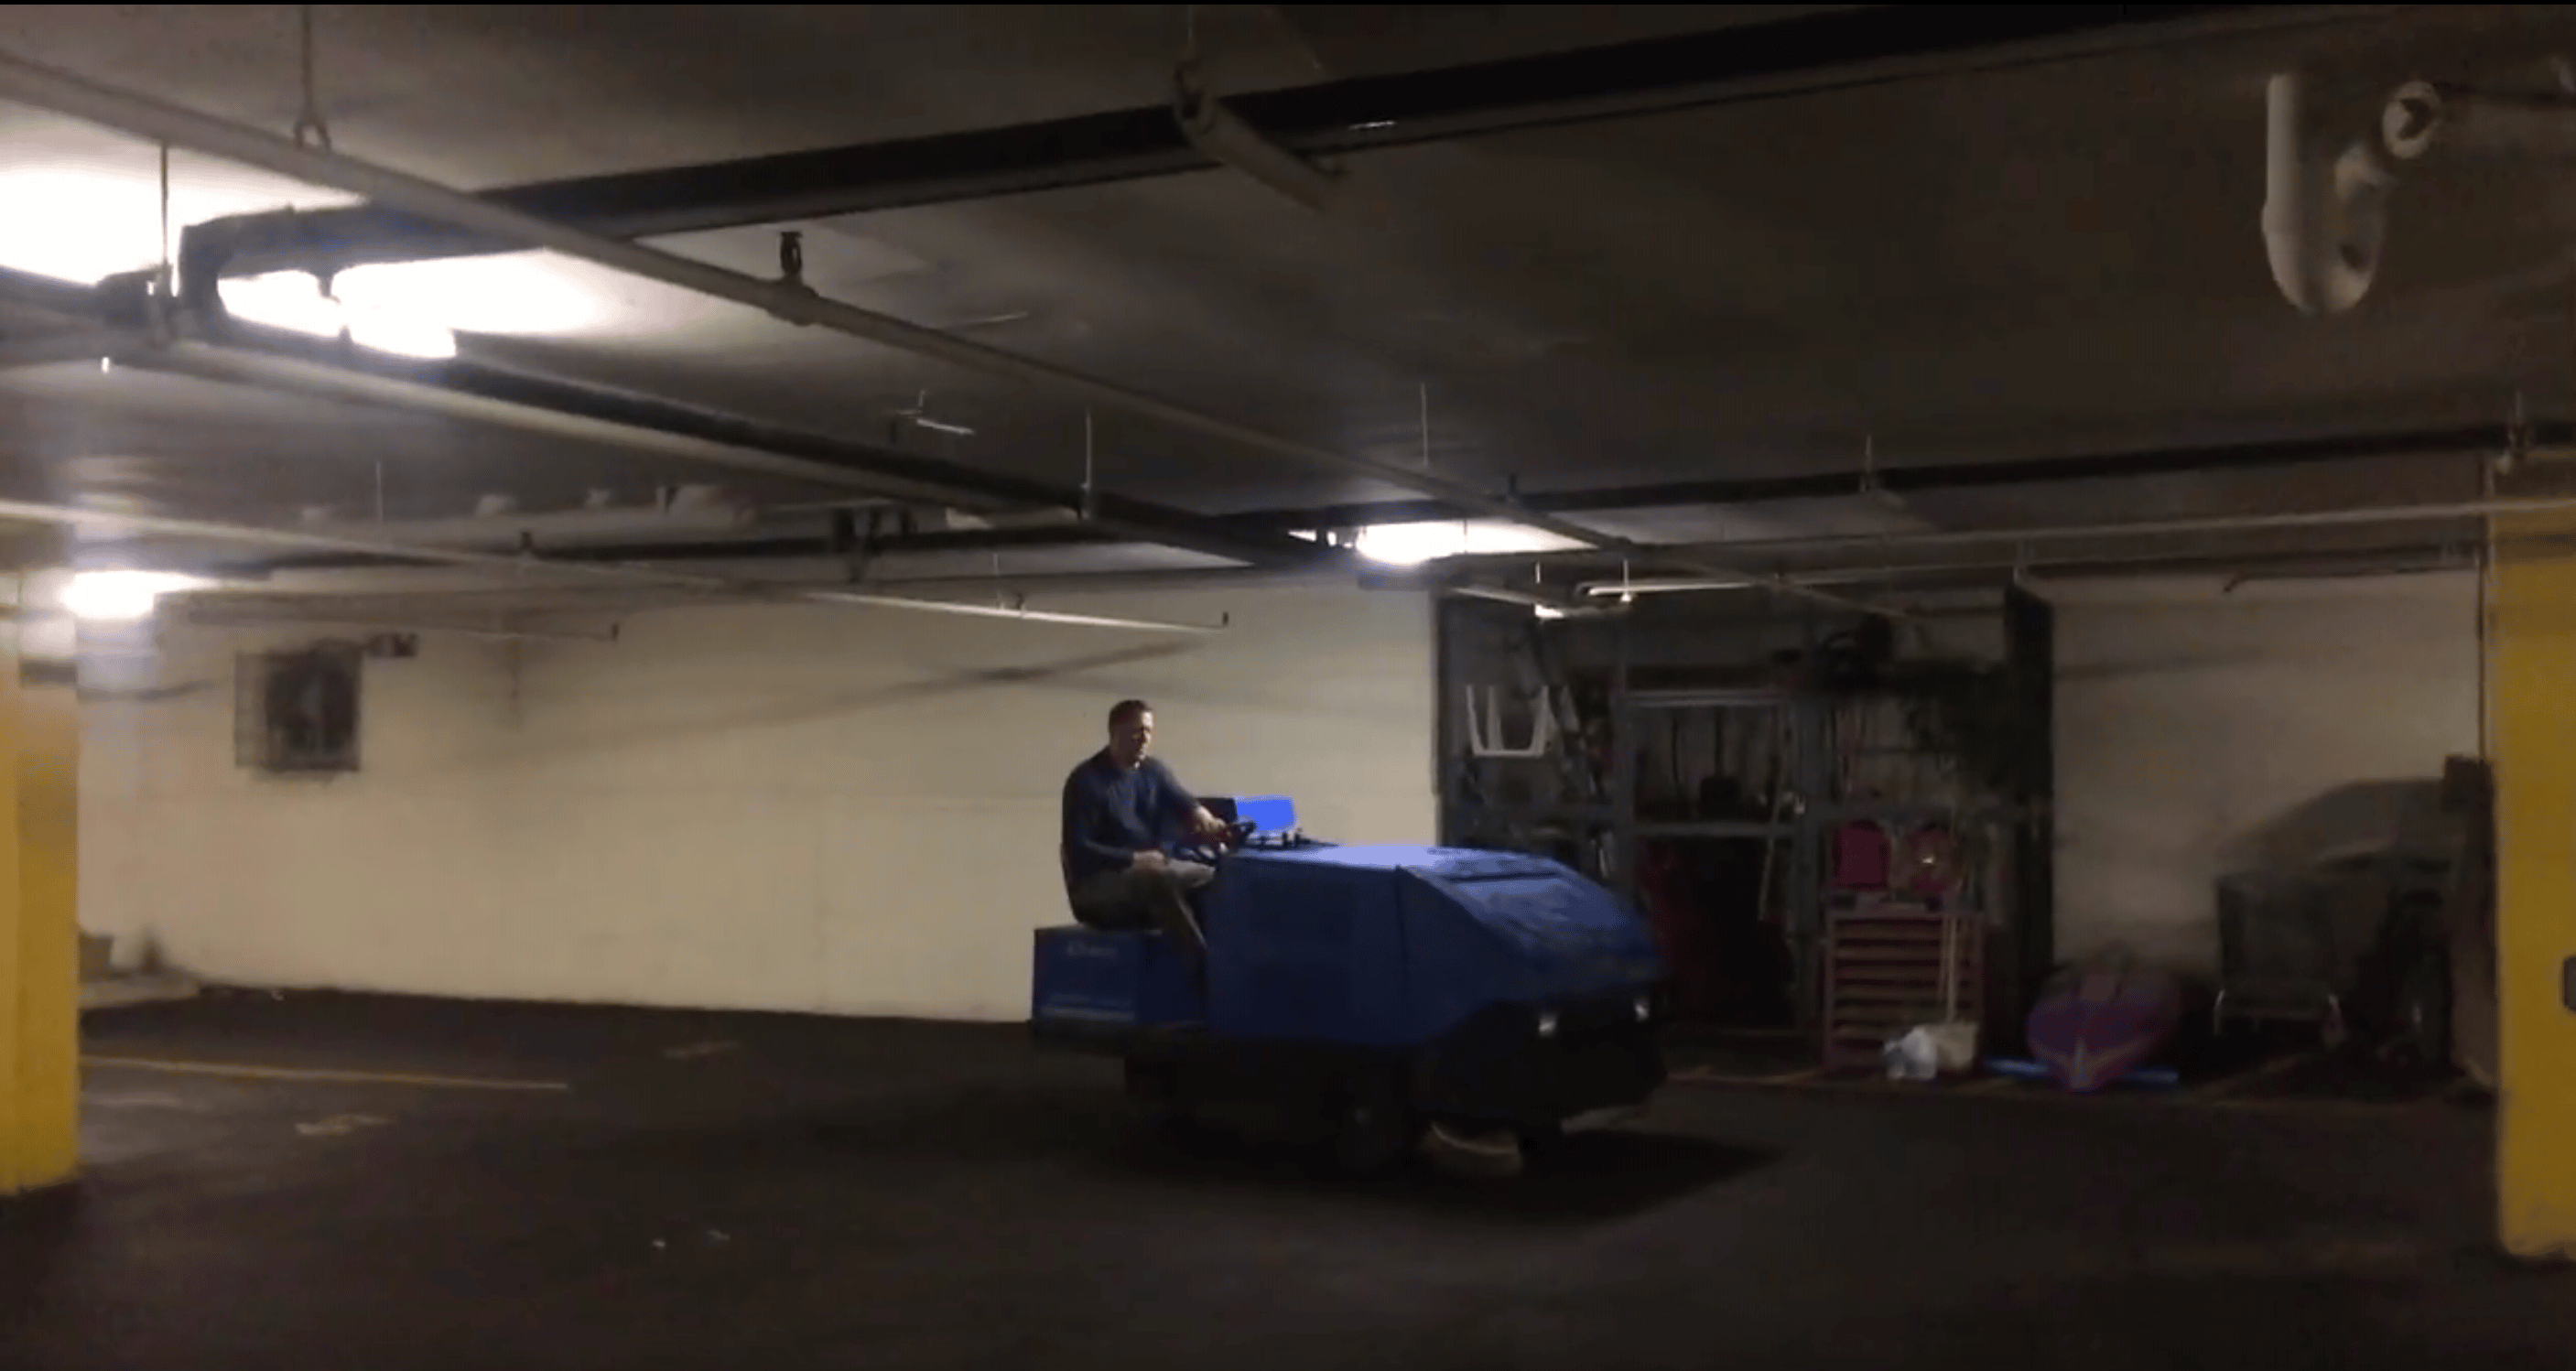 Our Parking Garage Sweeper